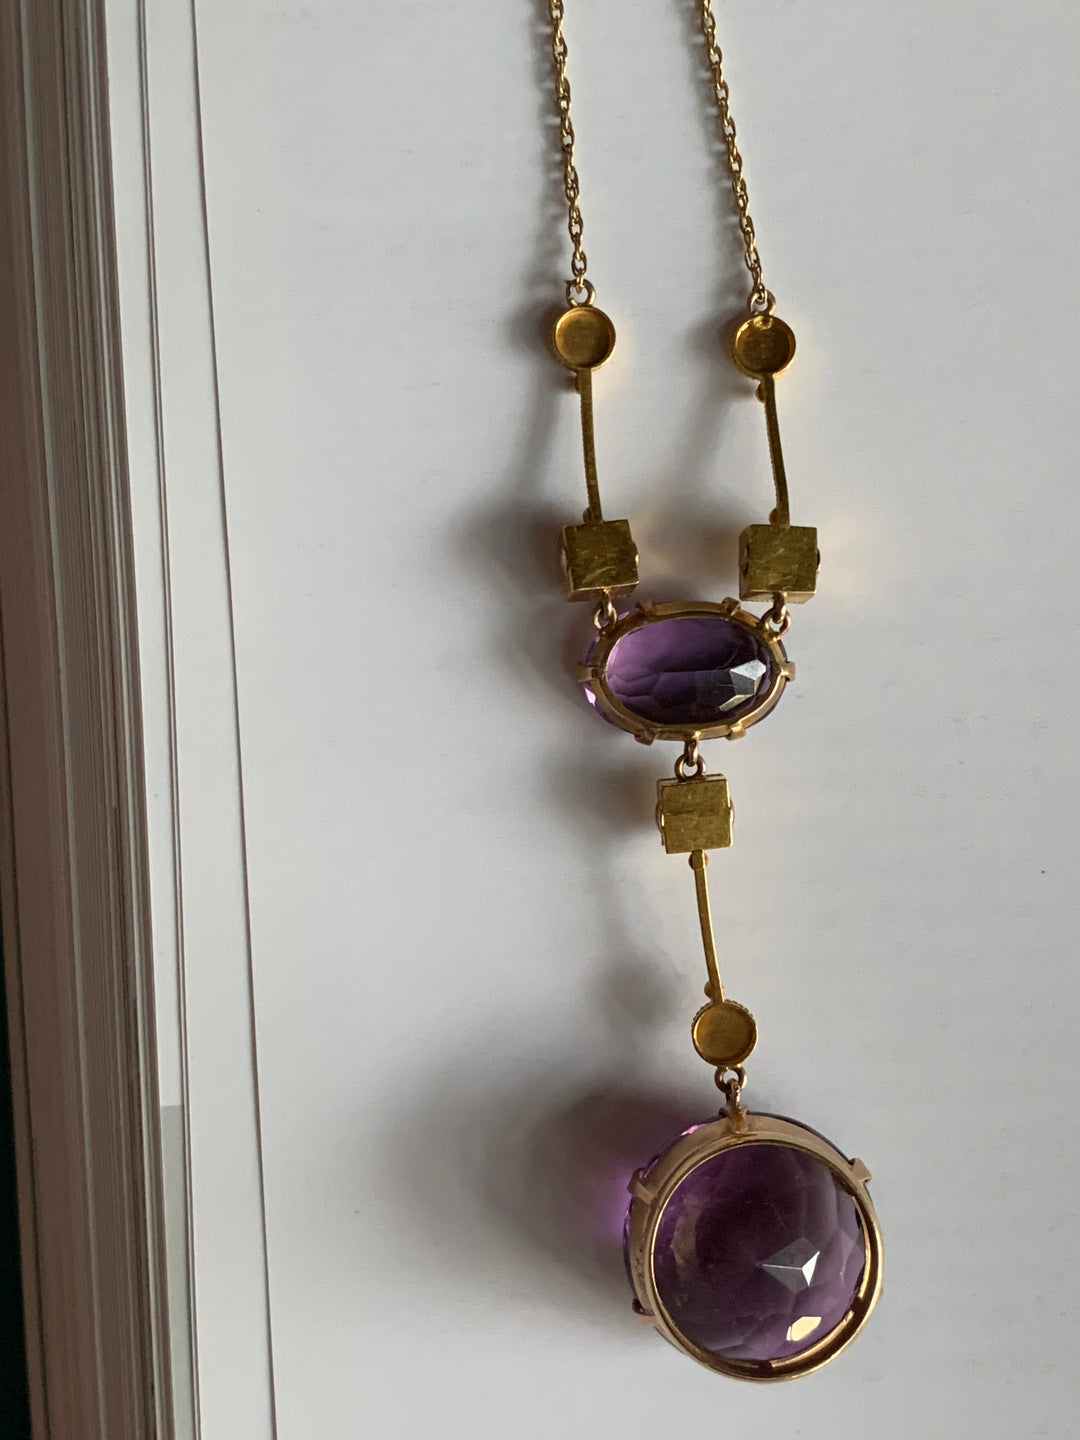 Outstanding Amethyst Necklace in 15k Circa 1879 *include ribbon*